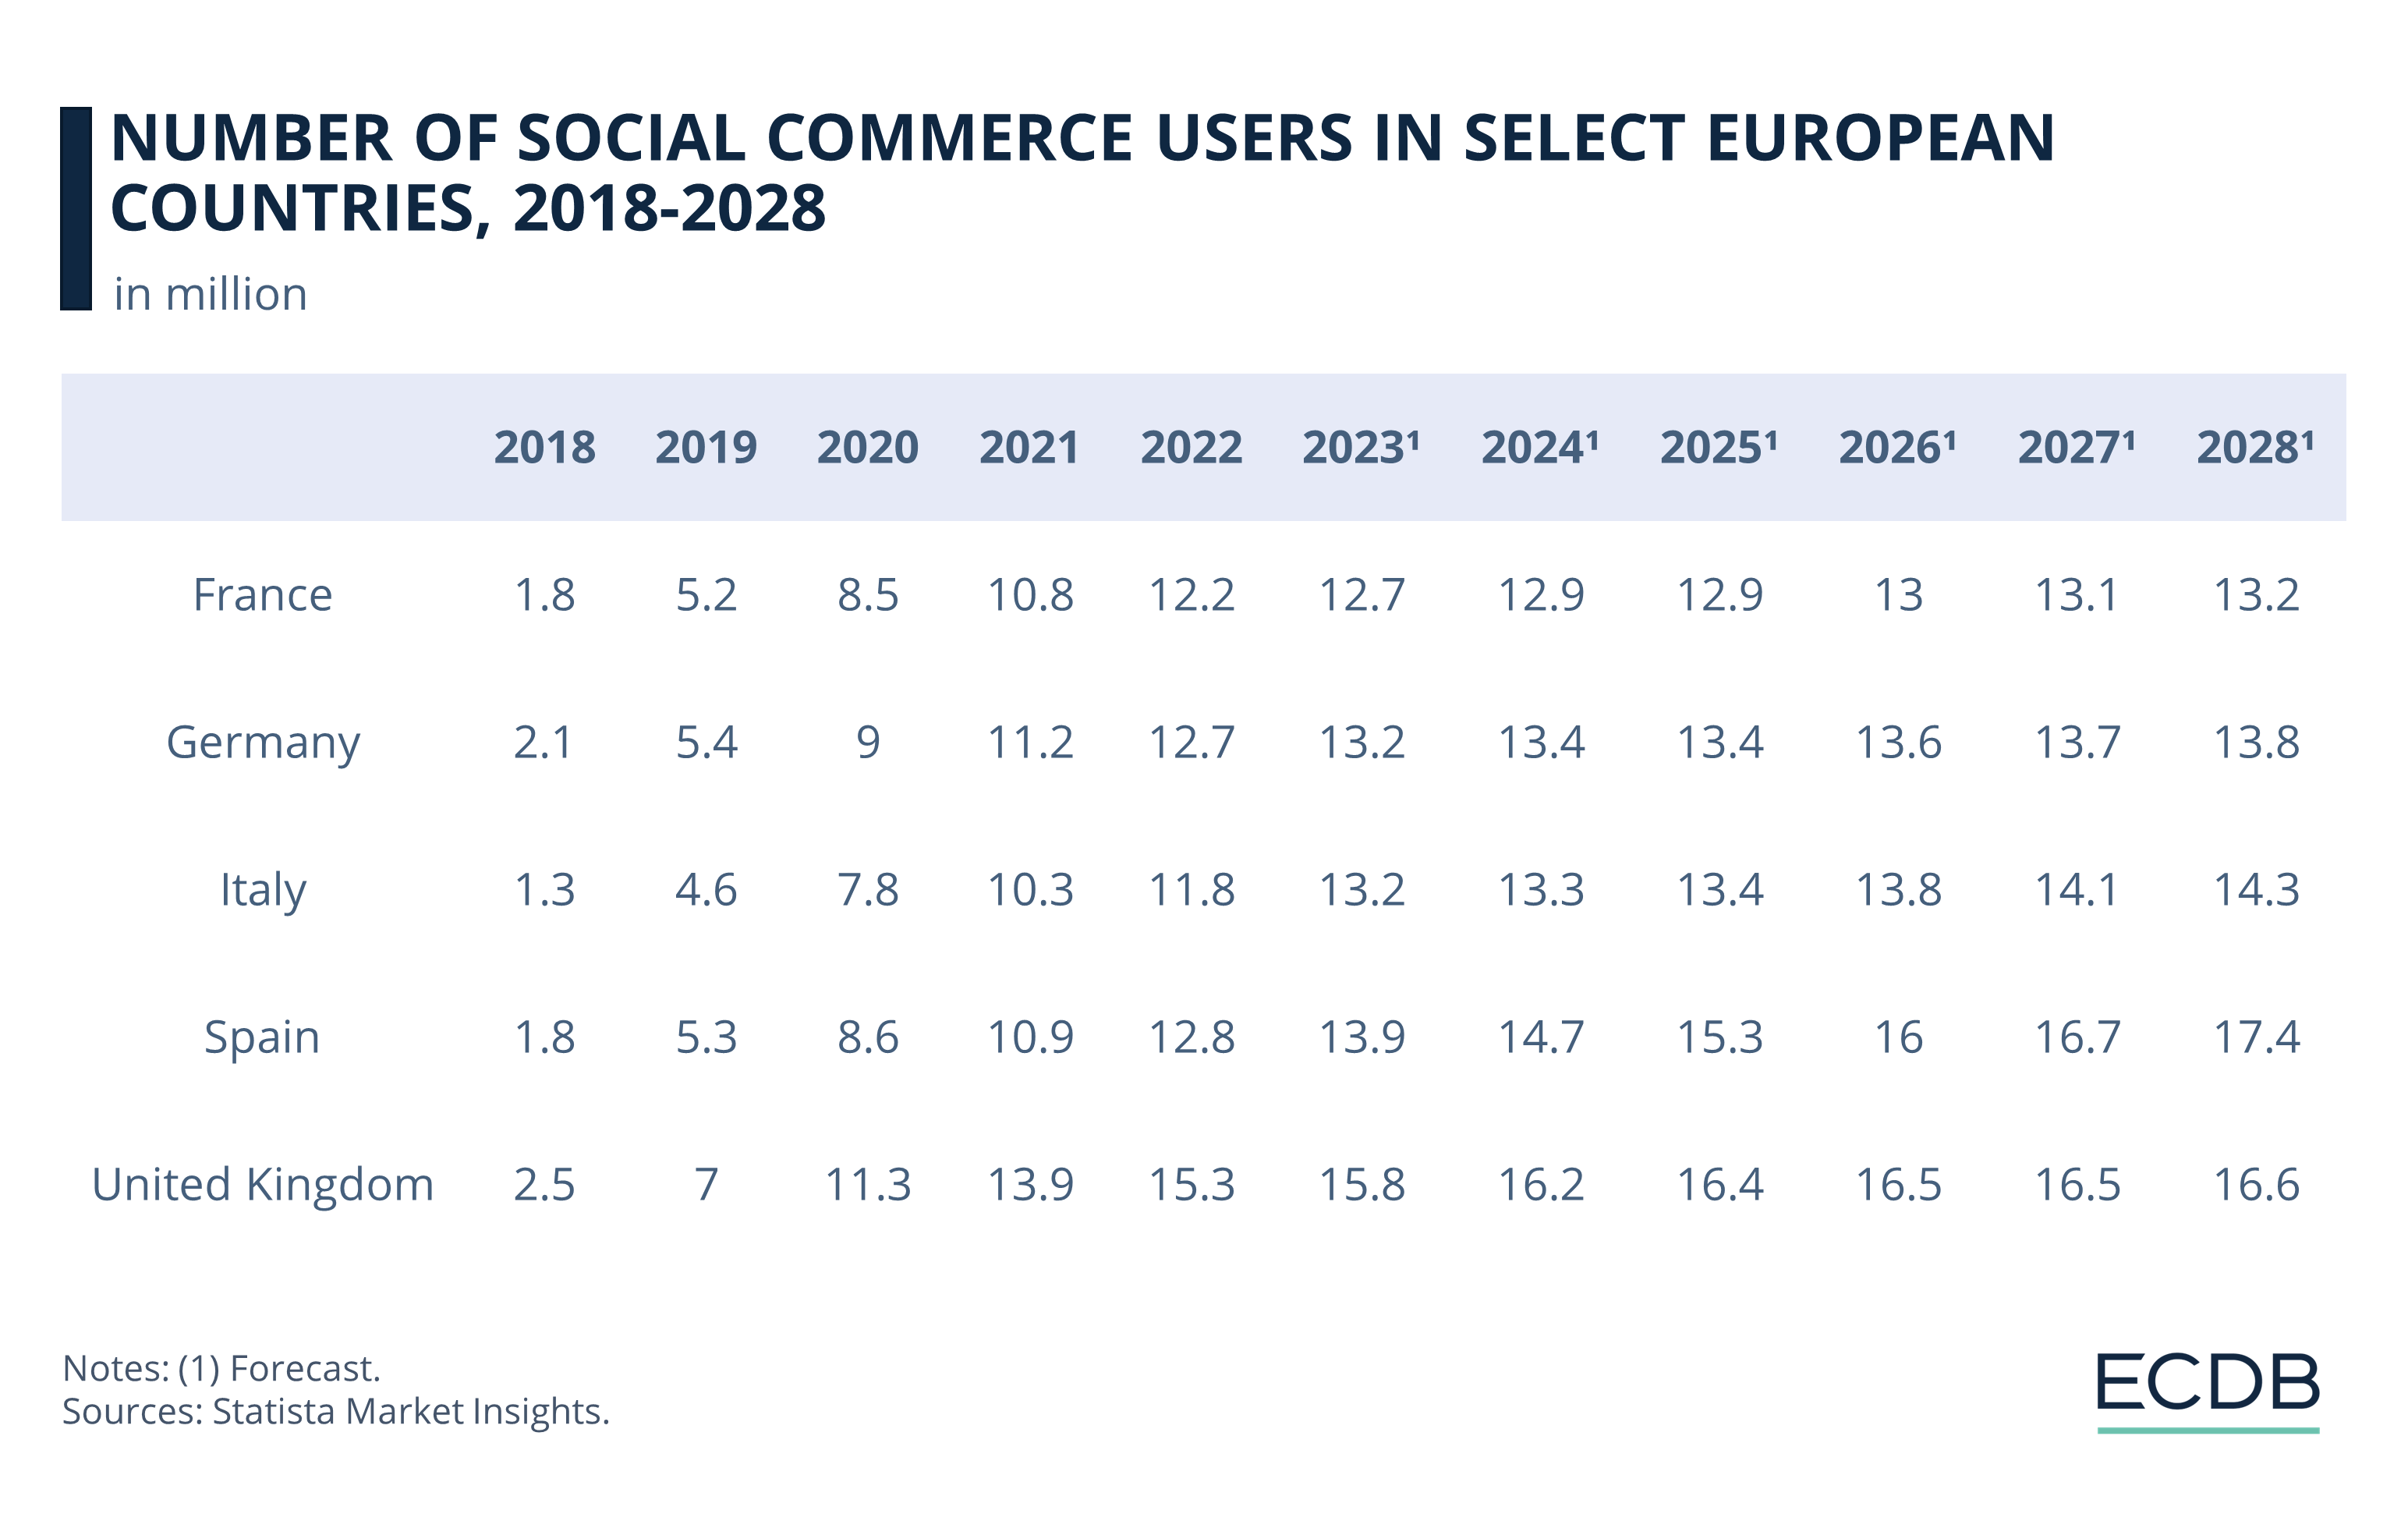 Number of Social Commerce Users in Select European Countries, 2018-2028